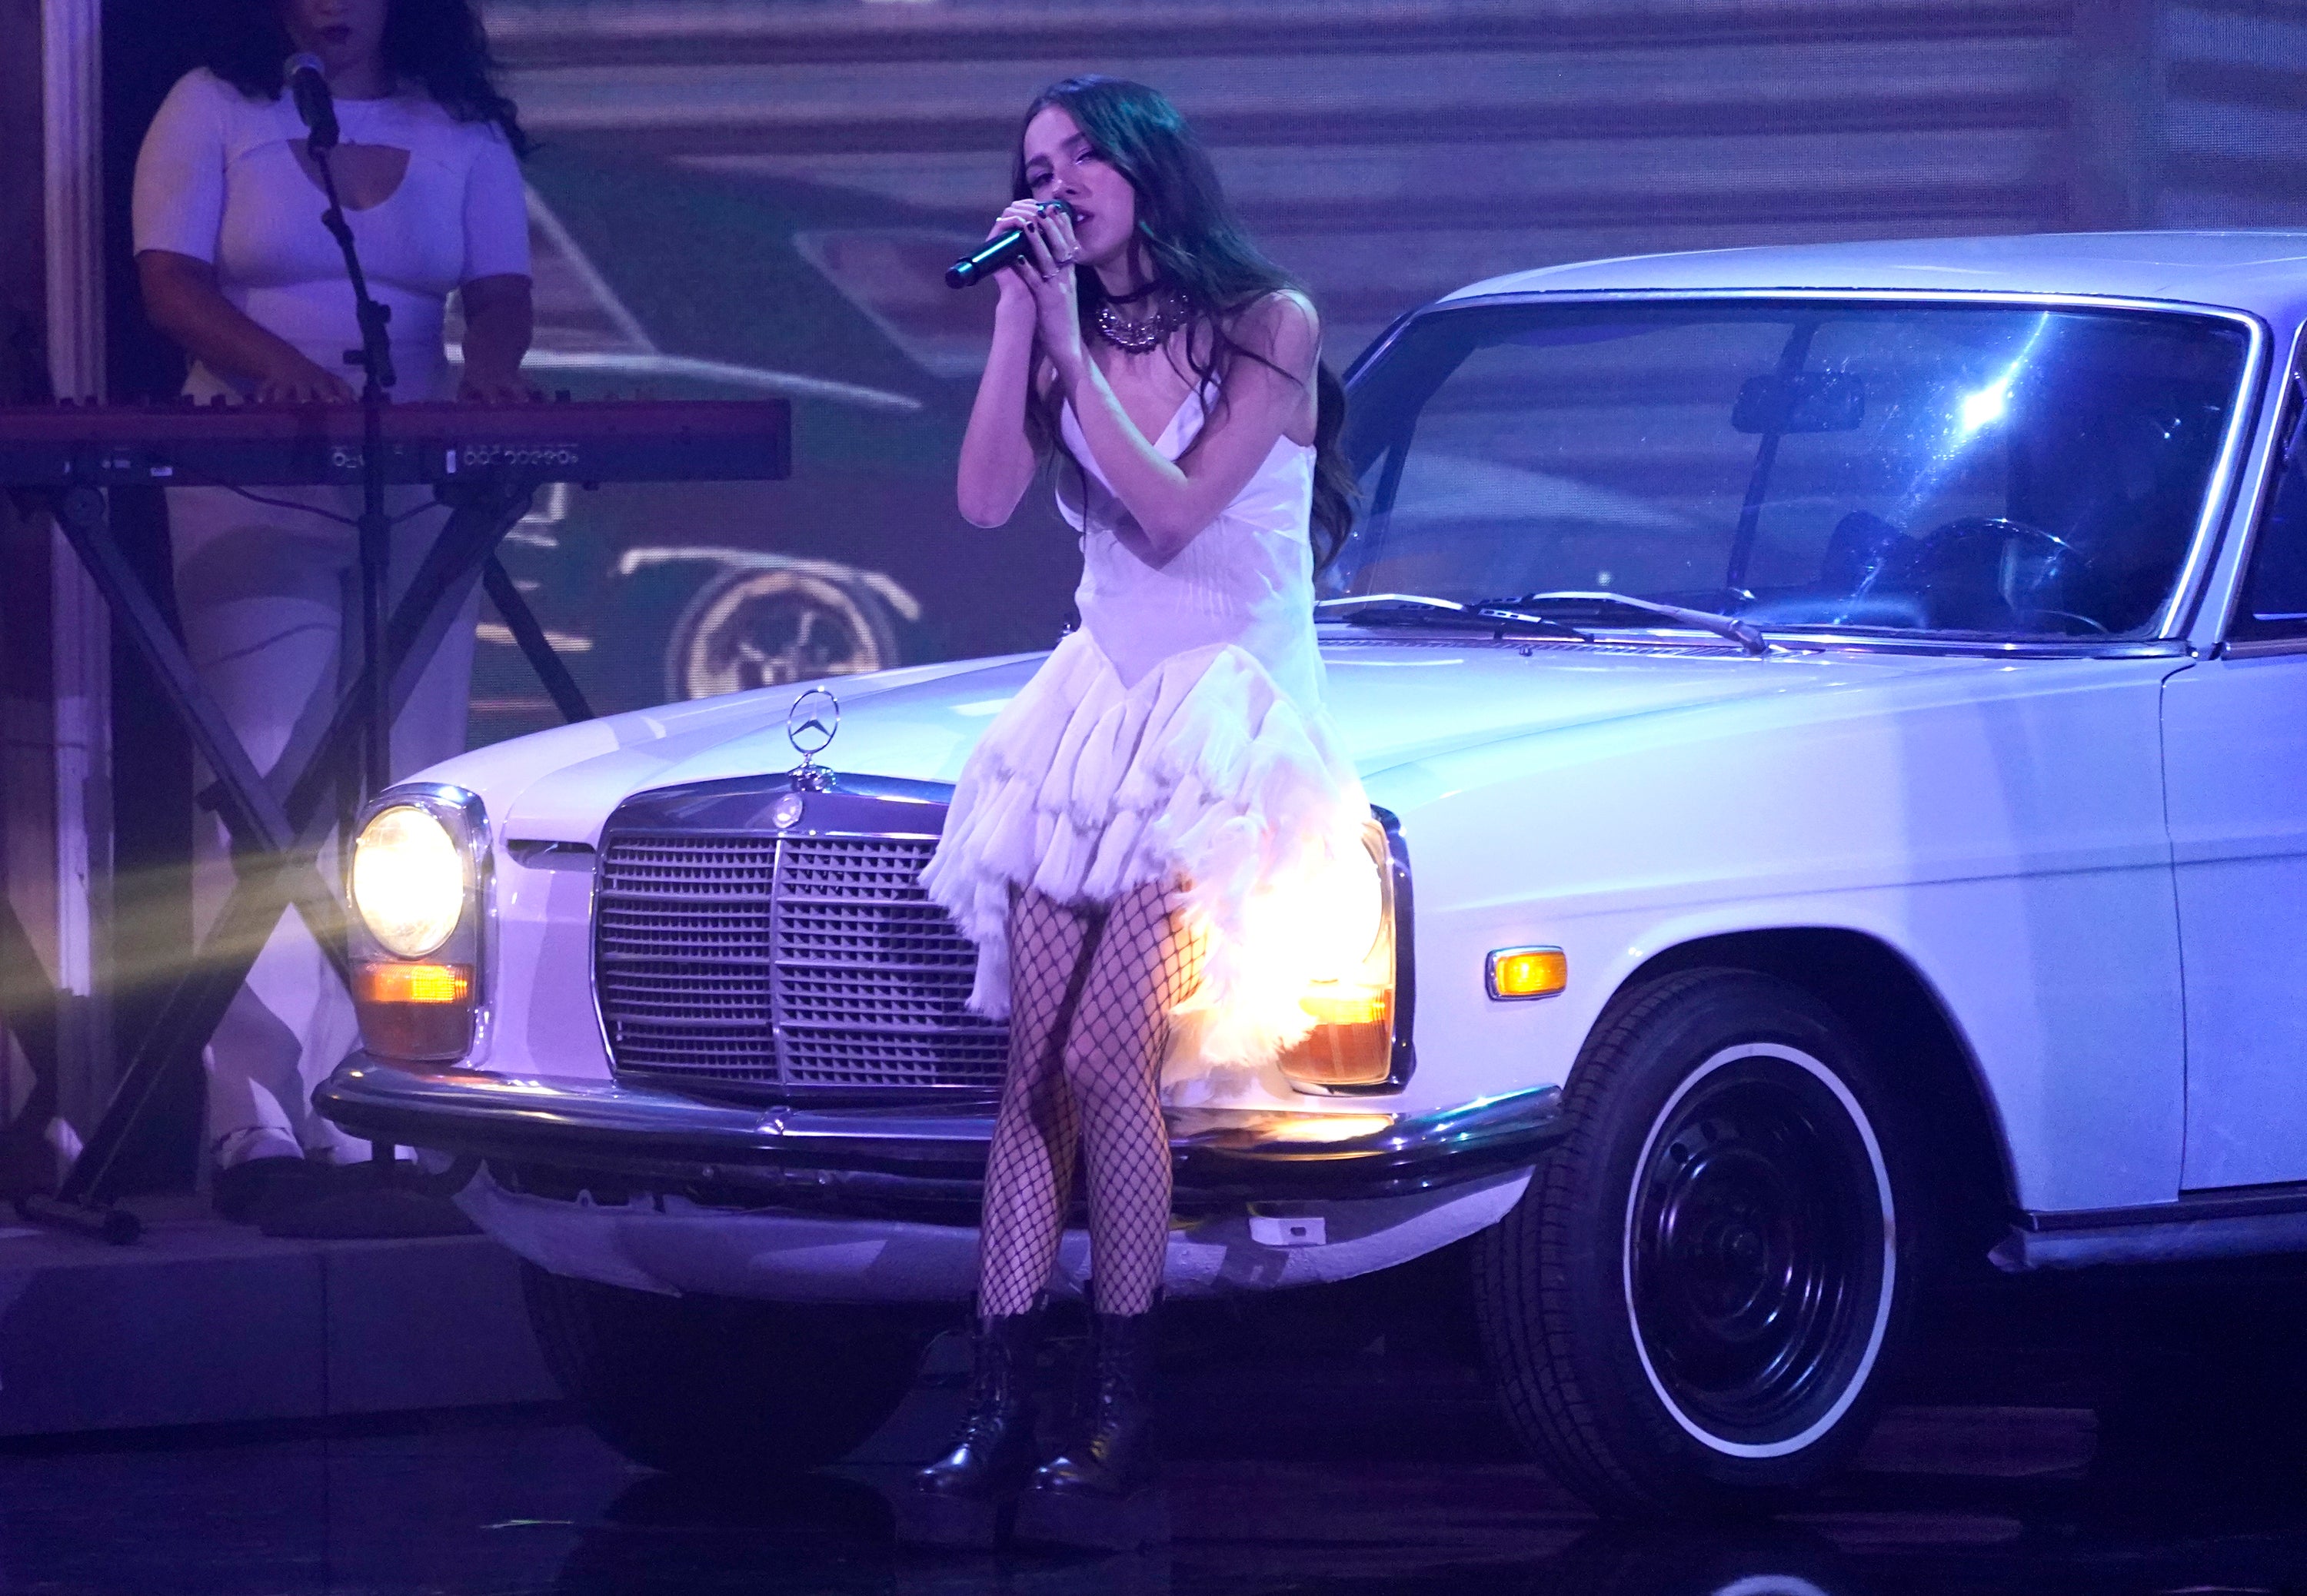 Rodrigo performed her breakout single “Drivers License” at the 64th Annual Grammy Awards